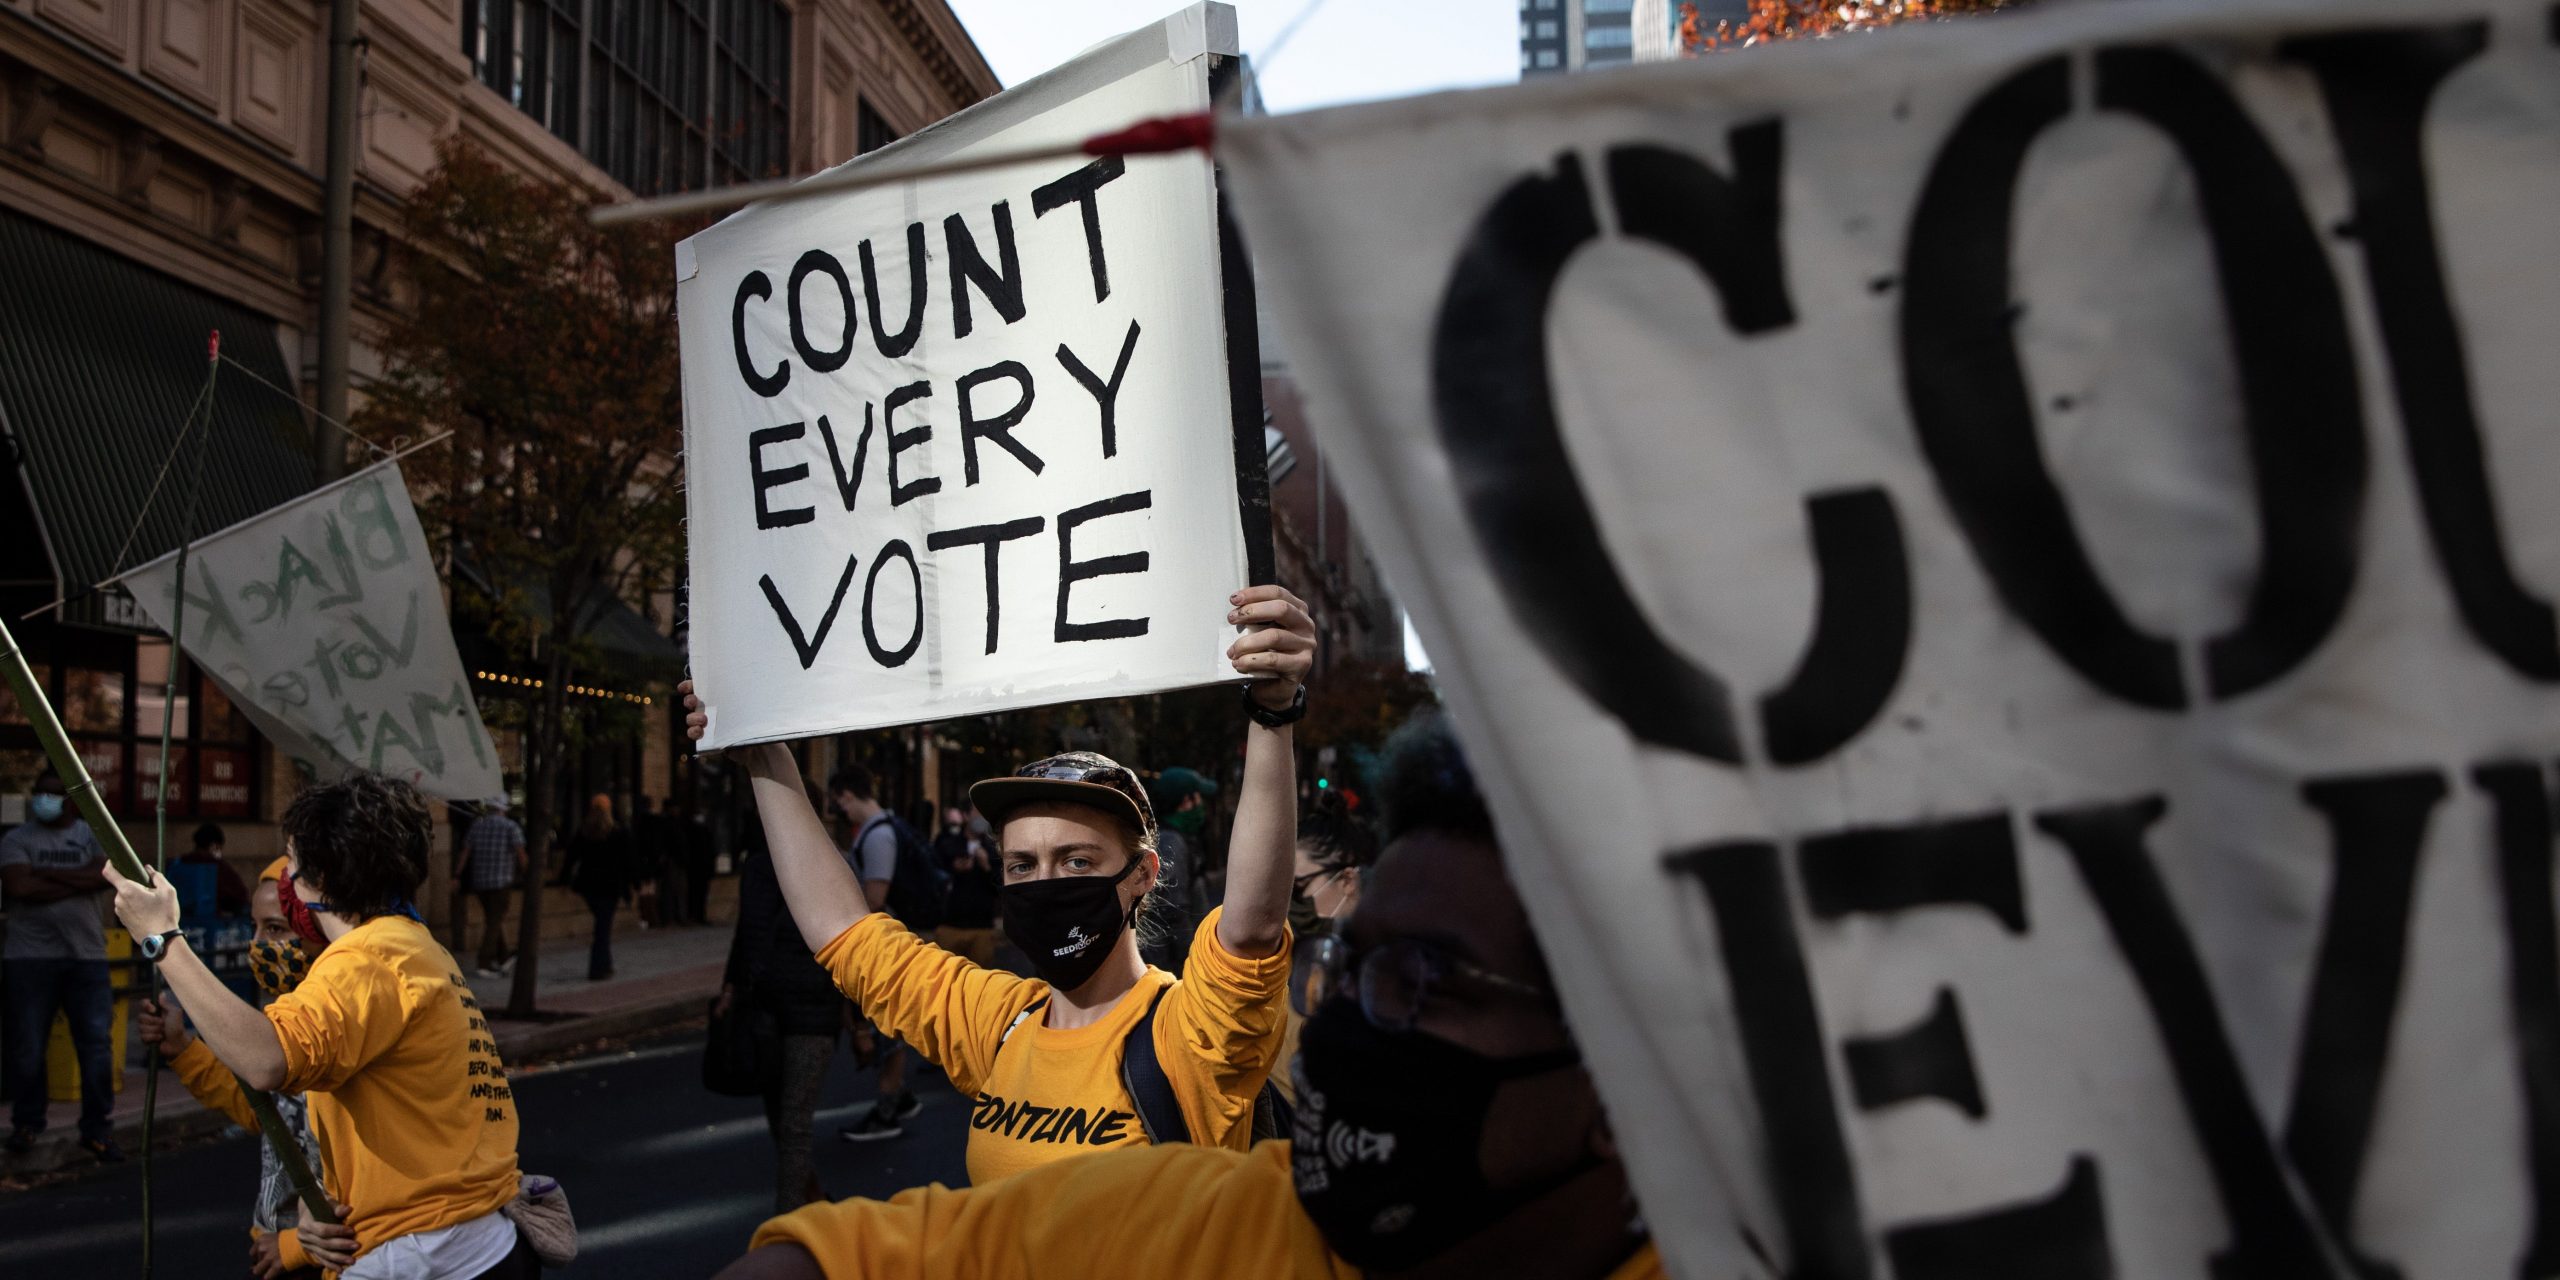 protester holding sign that says "count every vote"